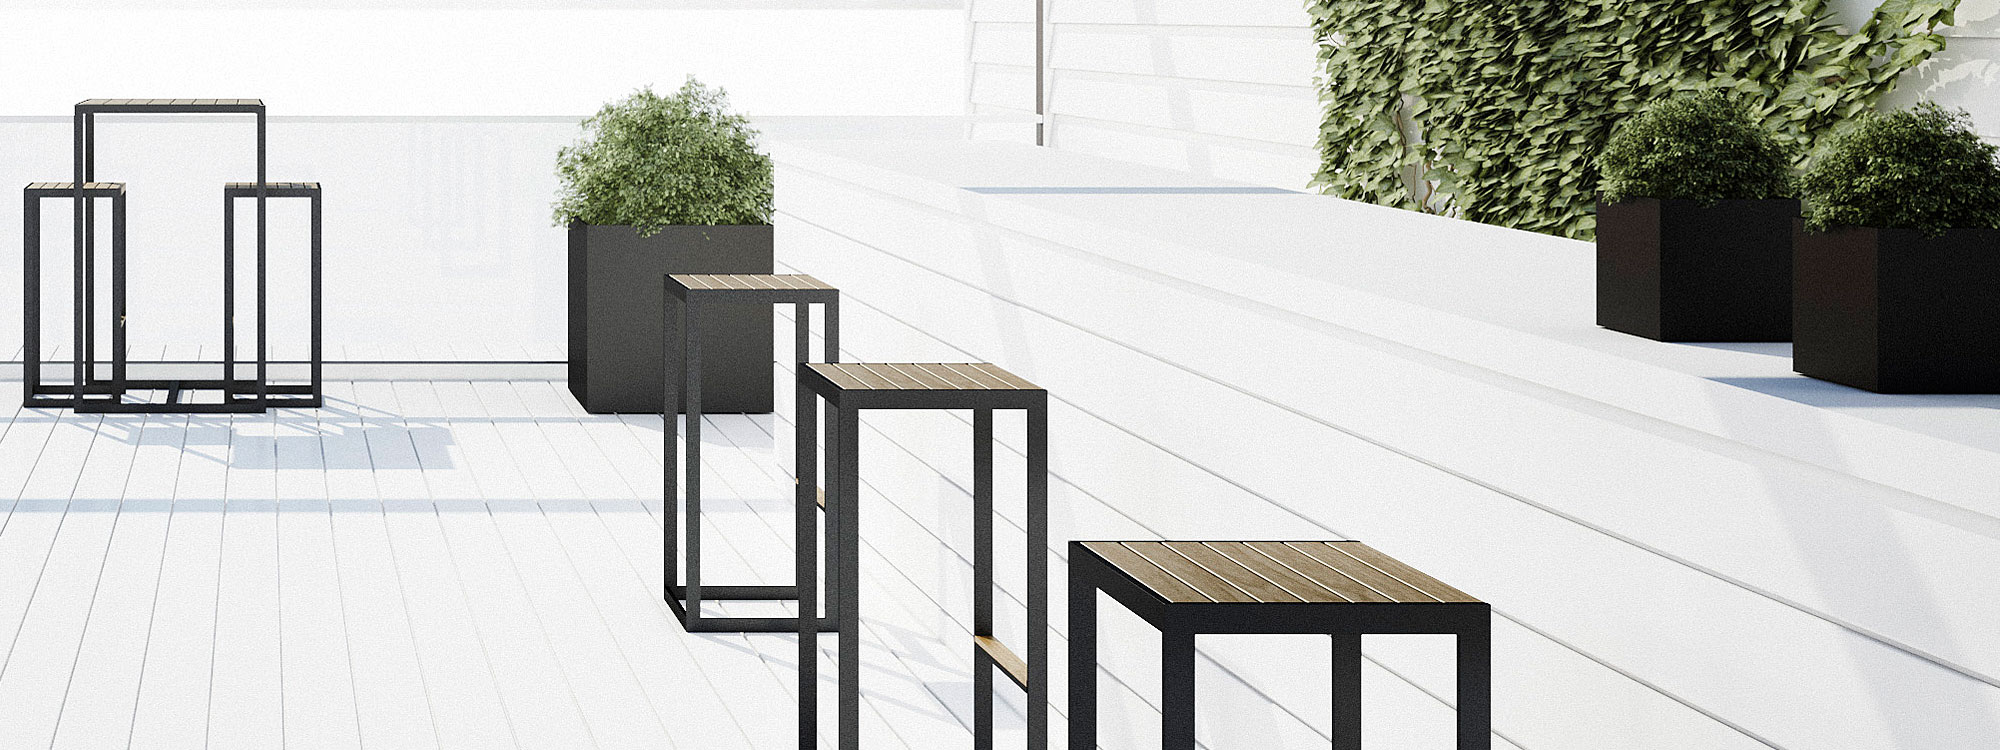 Image of Roshults modern outdoor bar furniture on whitewashed wooden decking punctuated by linear plant pots